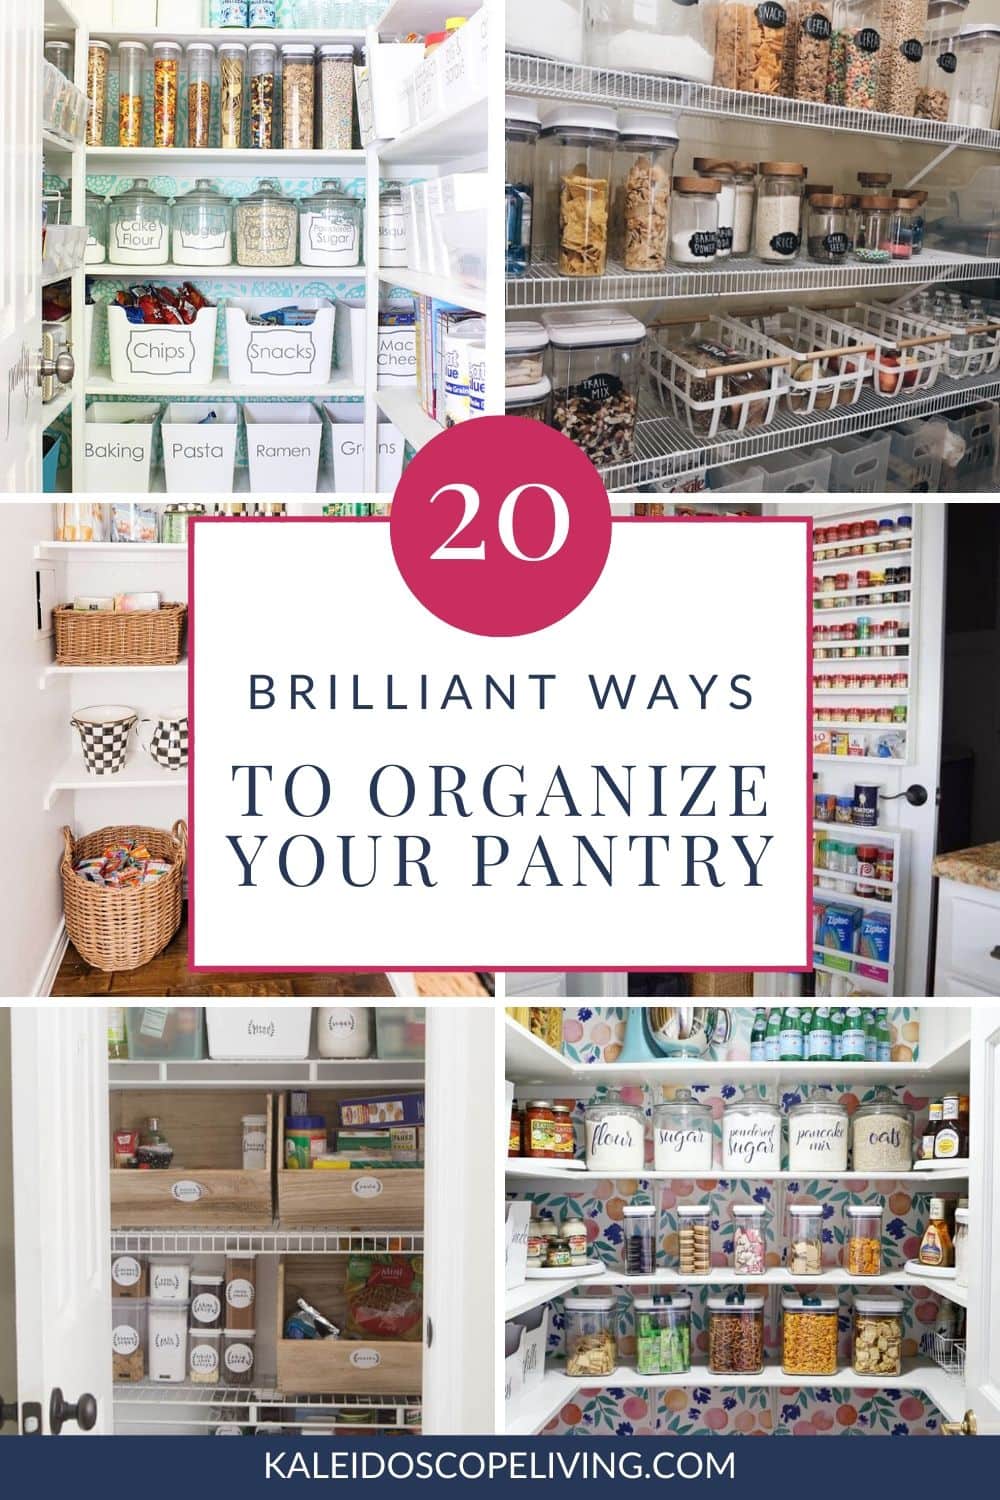 How to Organize Your Pantry + 18 Brilliant Pantry Ideas